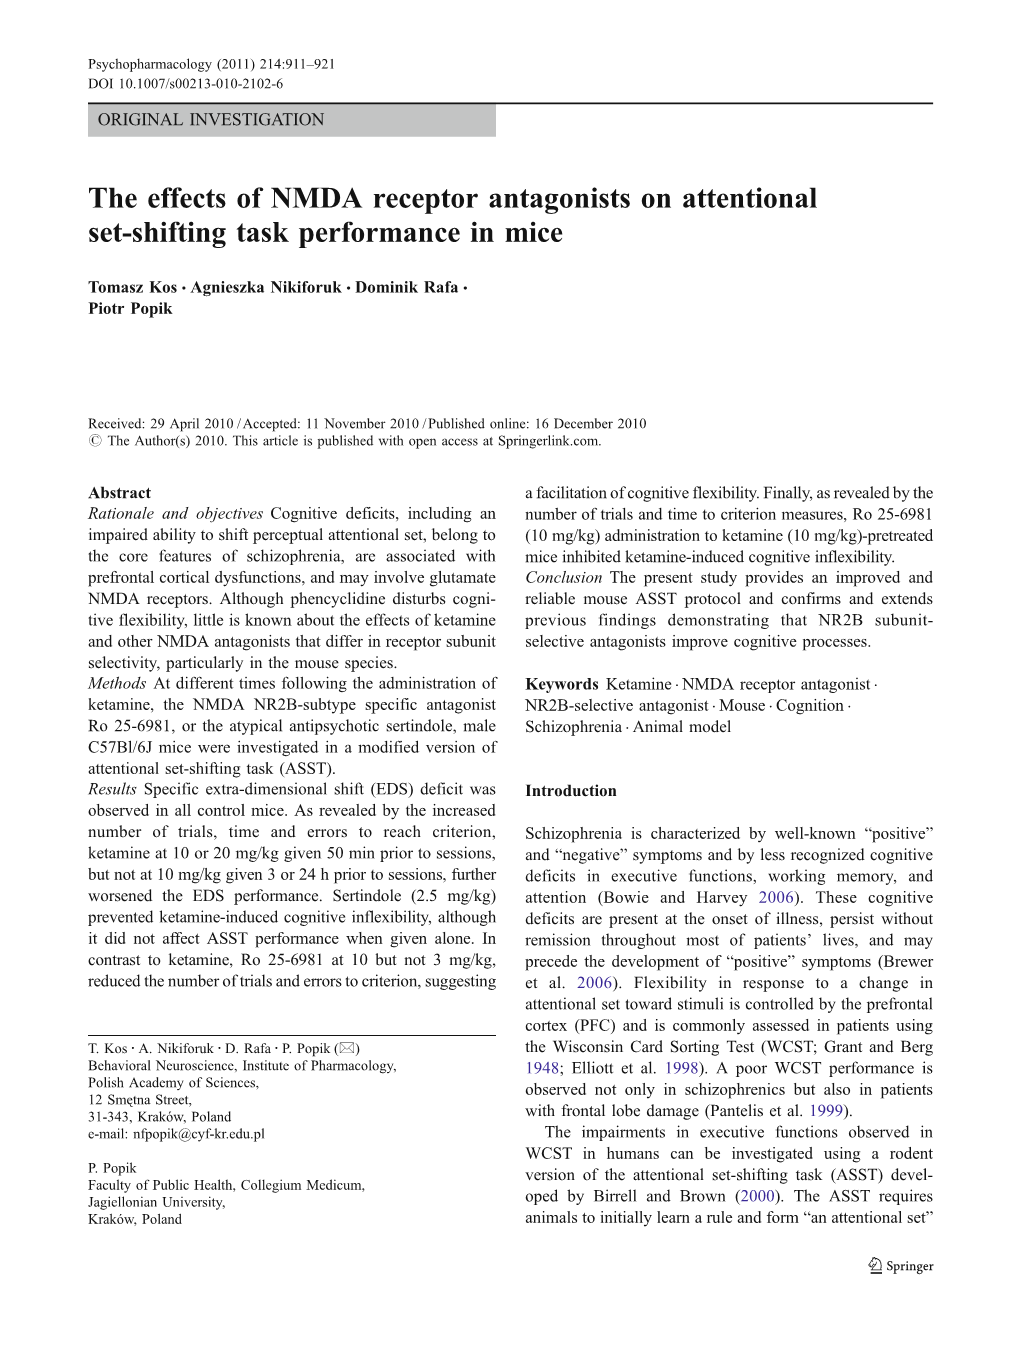 The Effects of NMDA Receptor Antagonists on Attentional Set-Shifting Task Performance in Mice